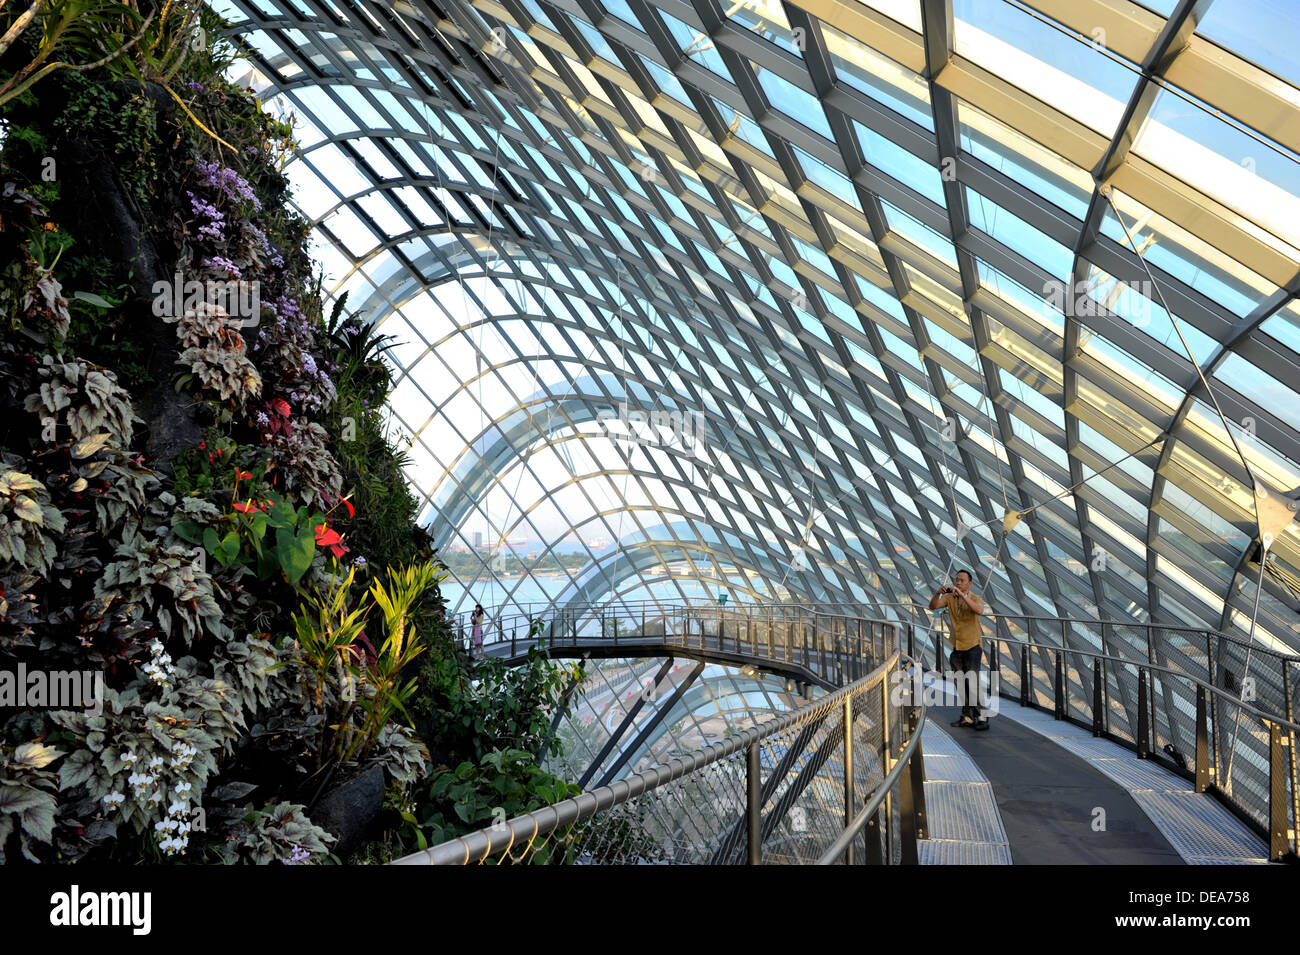 Singapore Tourist Attractions - Cloud Forest at Gardens by the Bay Stock Photo